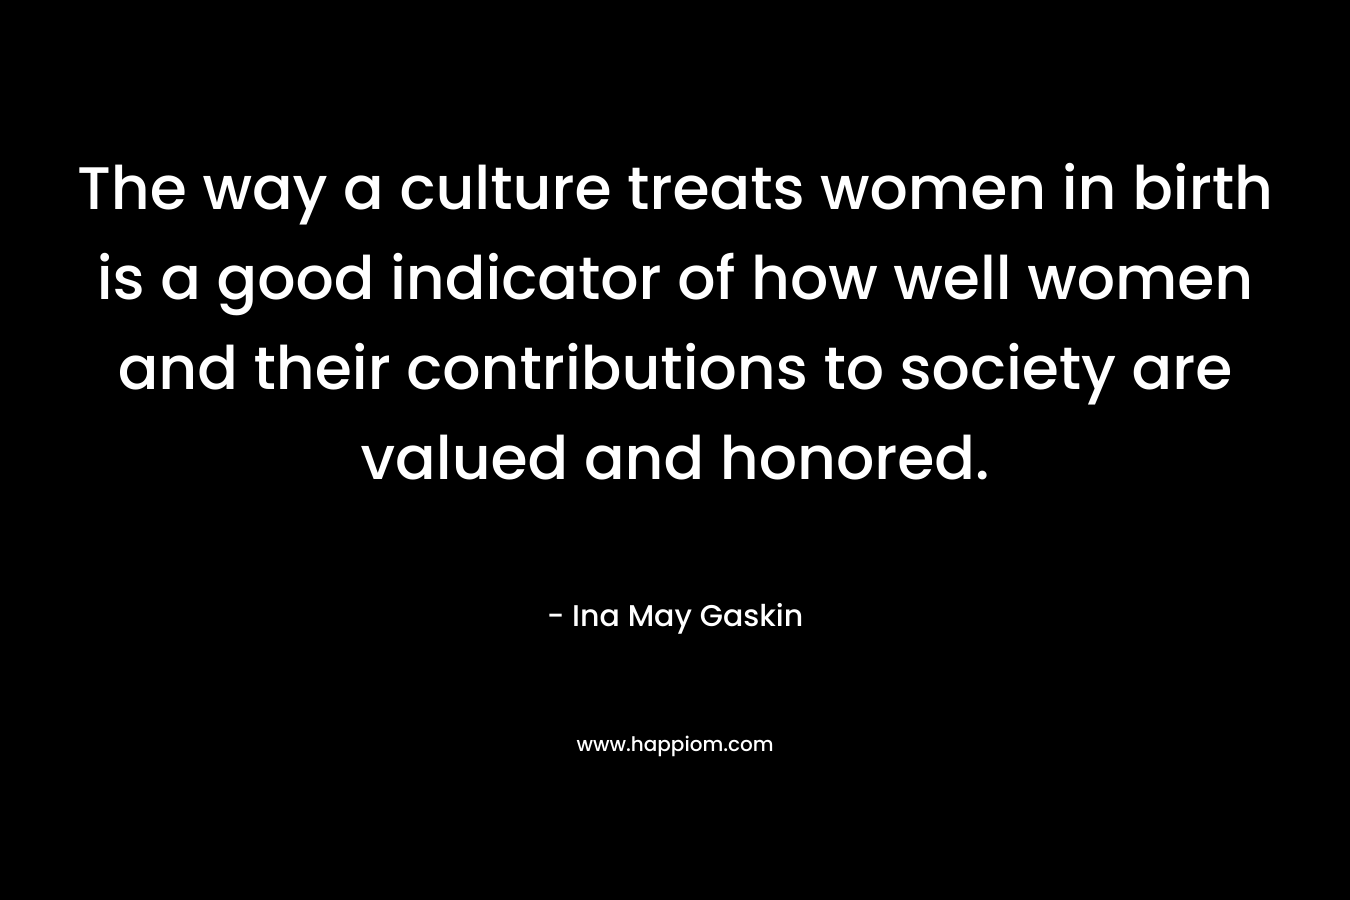 The way a culture treats women in birth is a good indicator of how well women and their contributions to society are valued and honored.